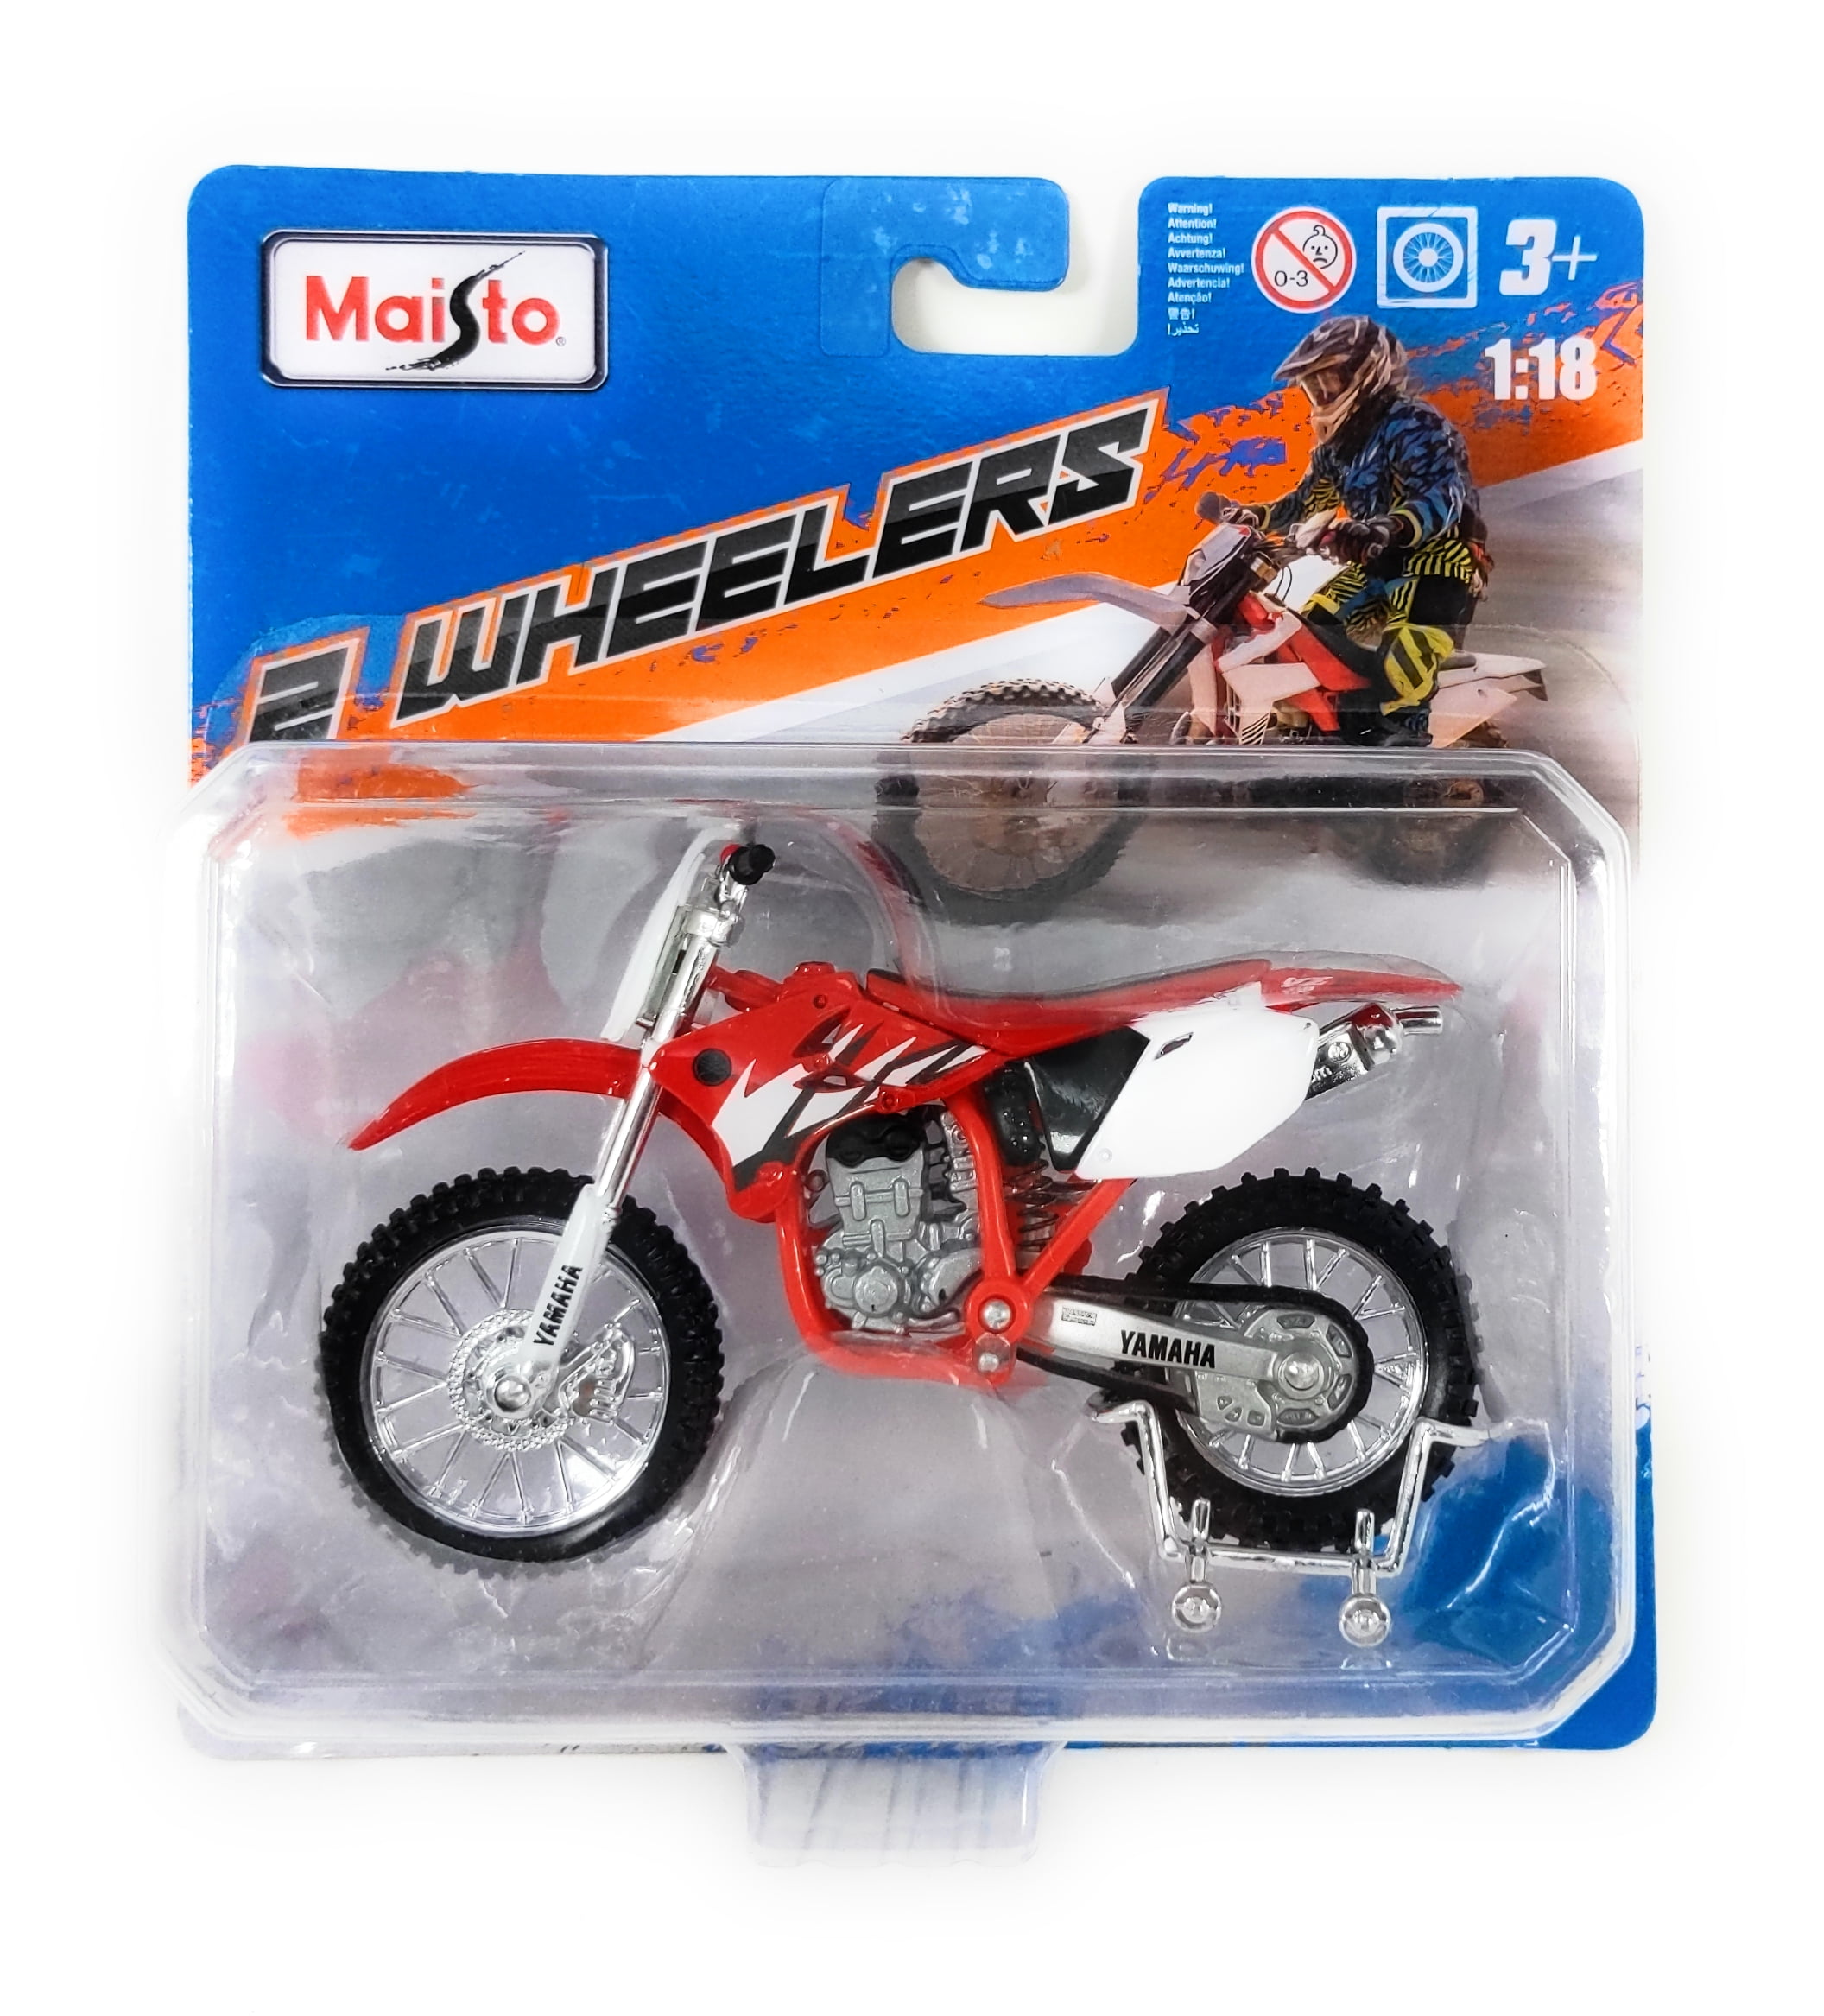 Maisto 2 Wheelers Yamaha YZ-450F Racing Motocross Bike Red and White  Motorcycle 1:18 Scale Die-Cast Replica